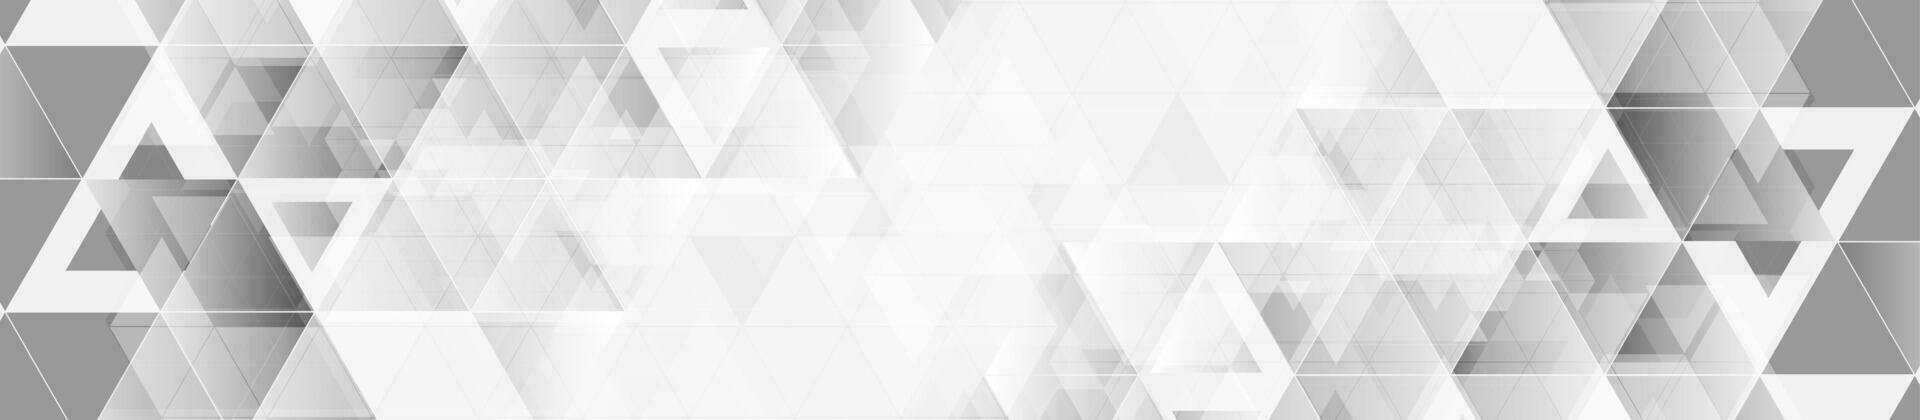 Gray glossy triangles abstract technology background vector